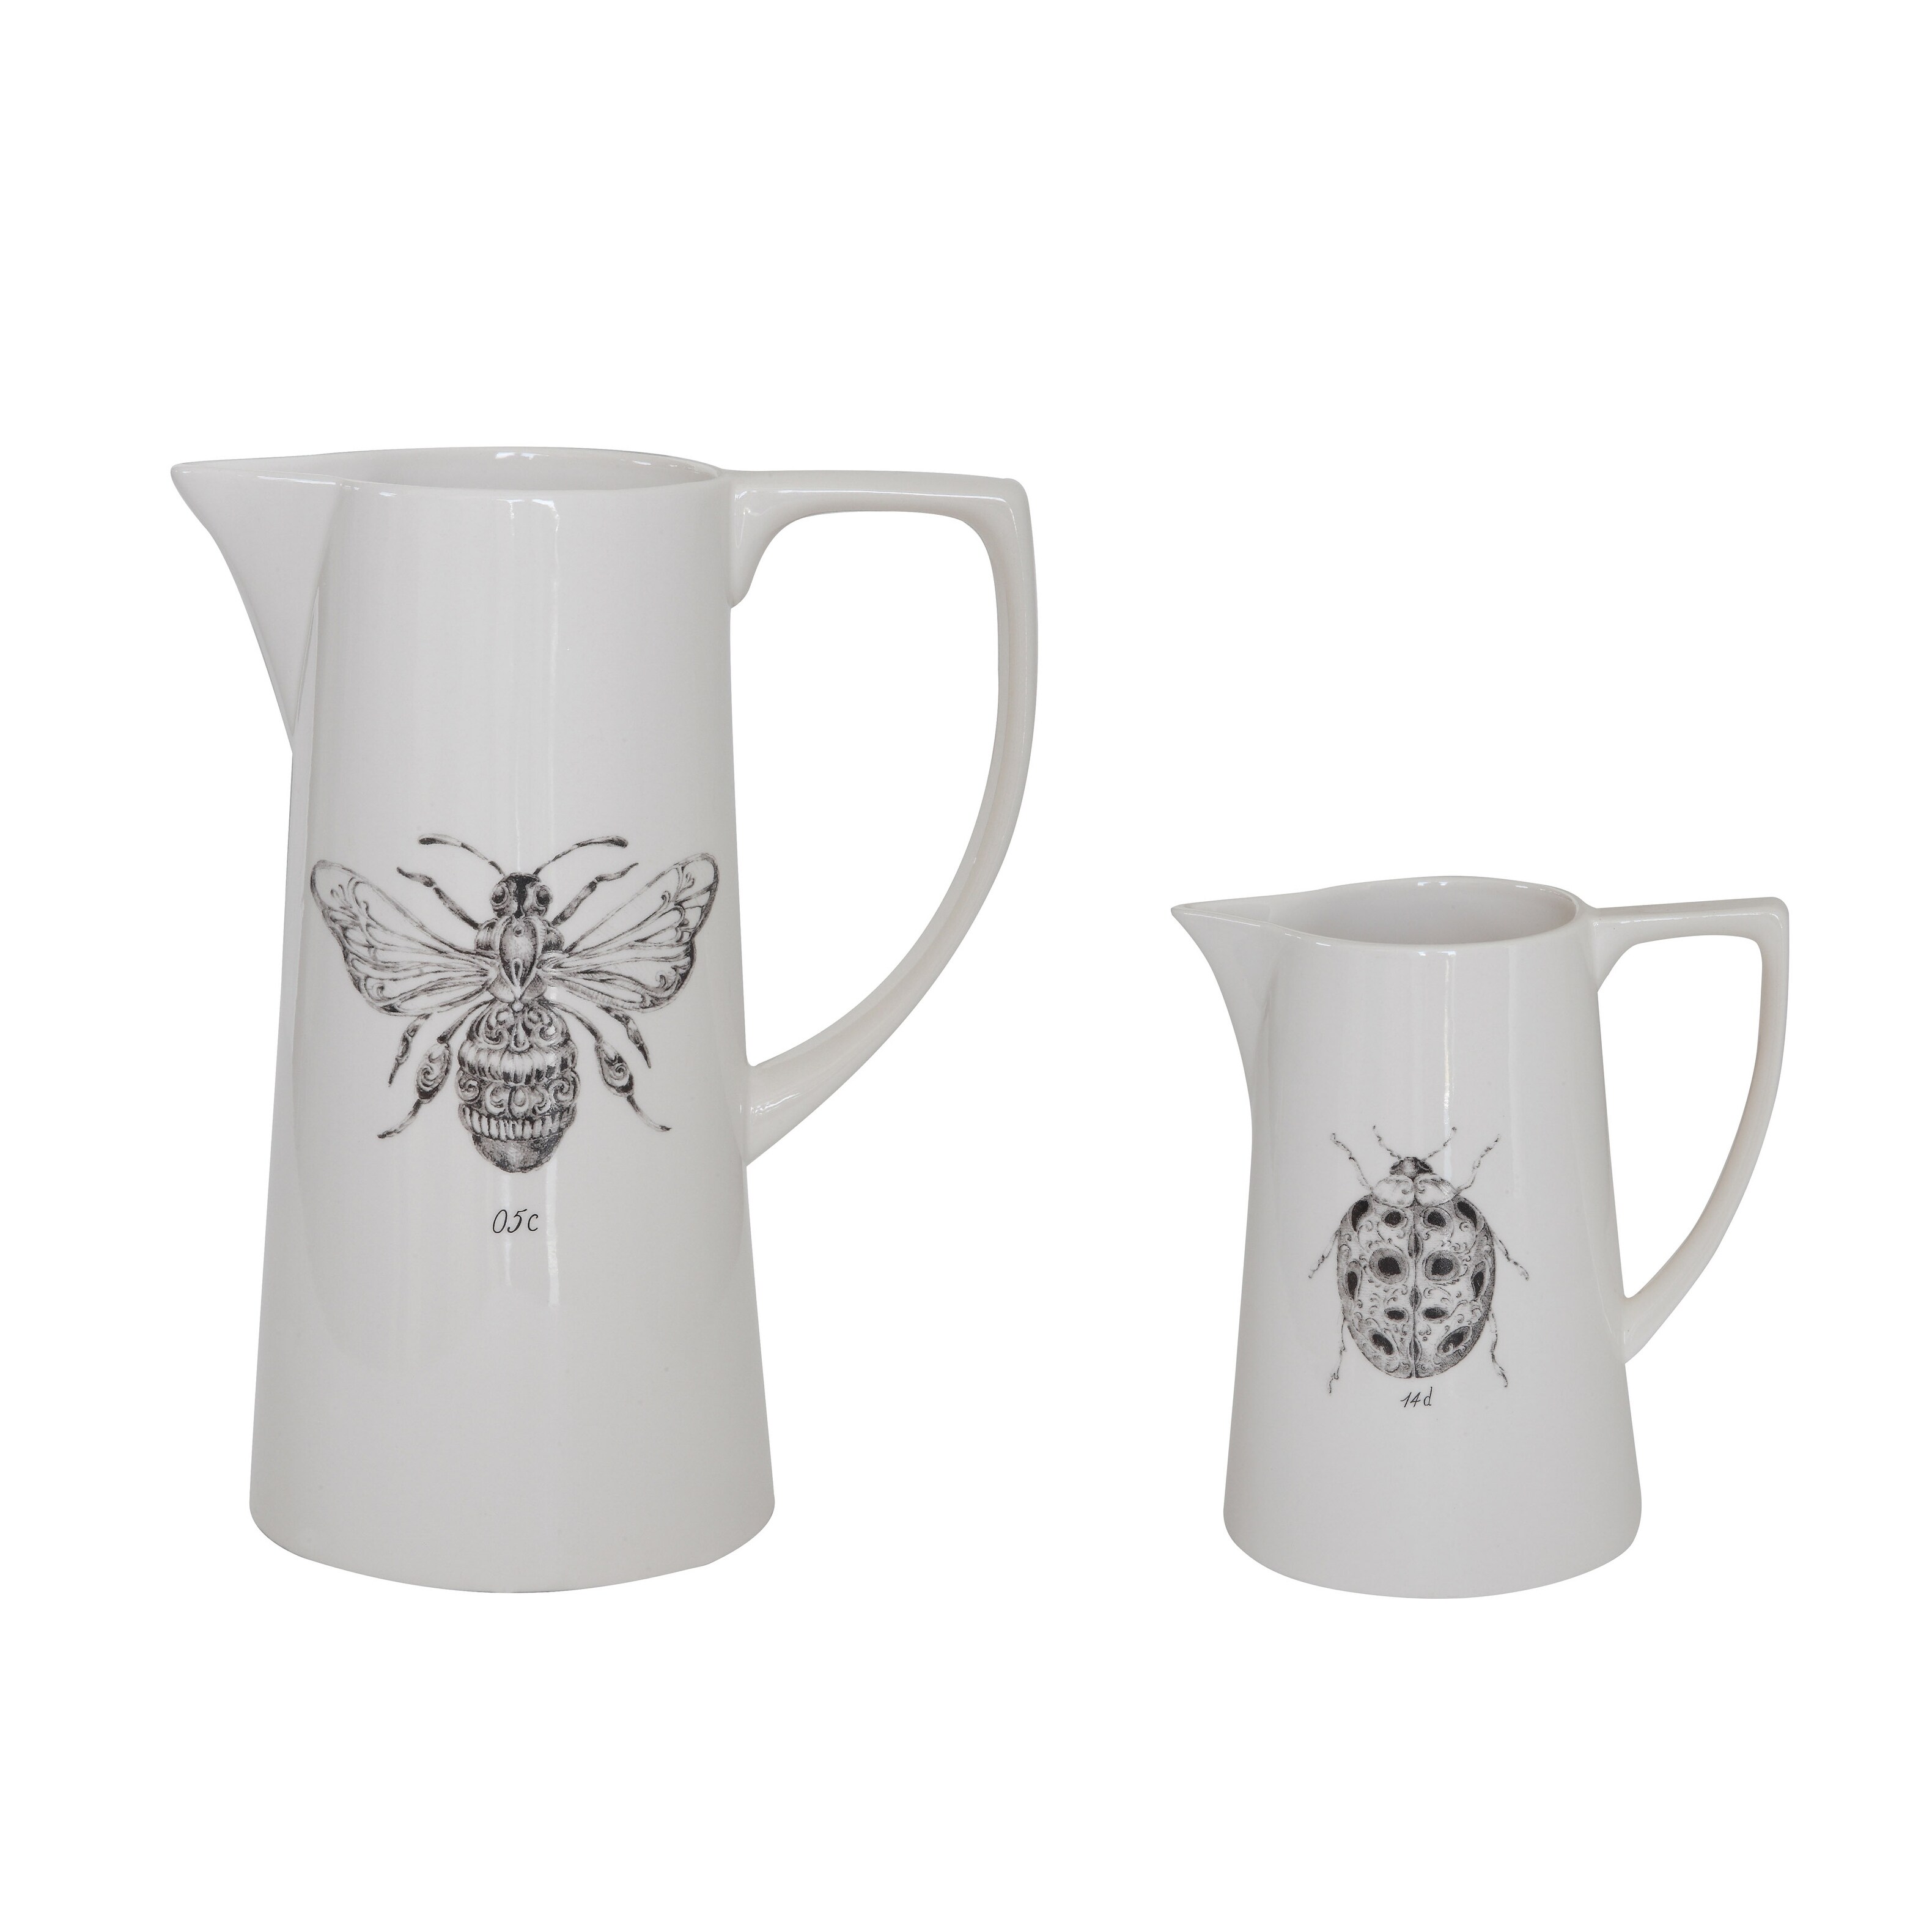 White Ceramic Pitcher with Bee Image